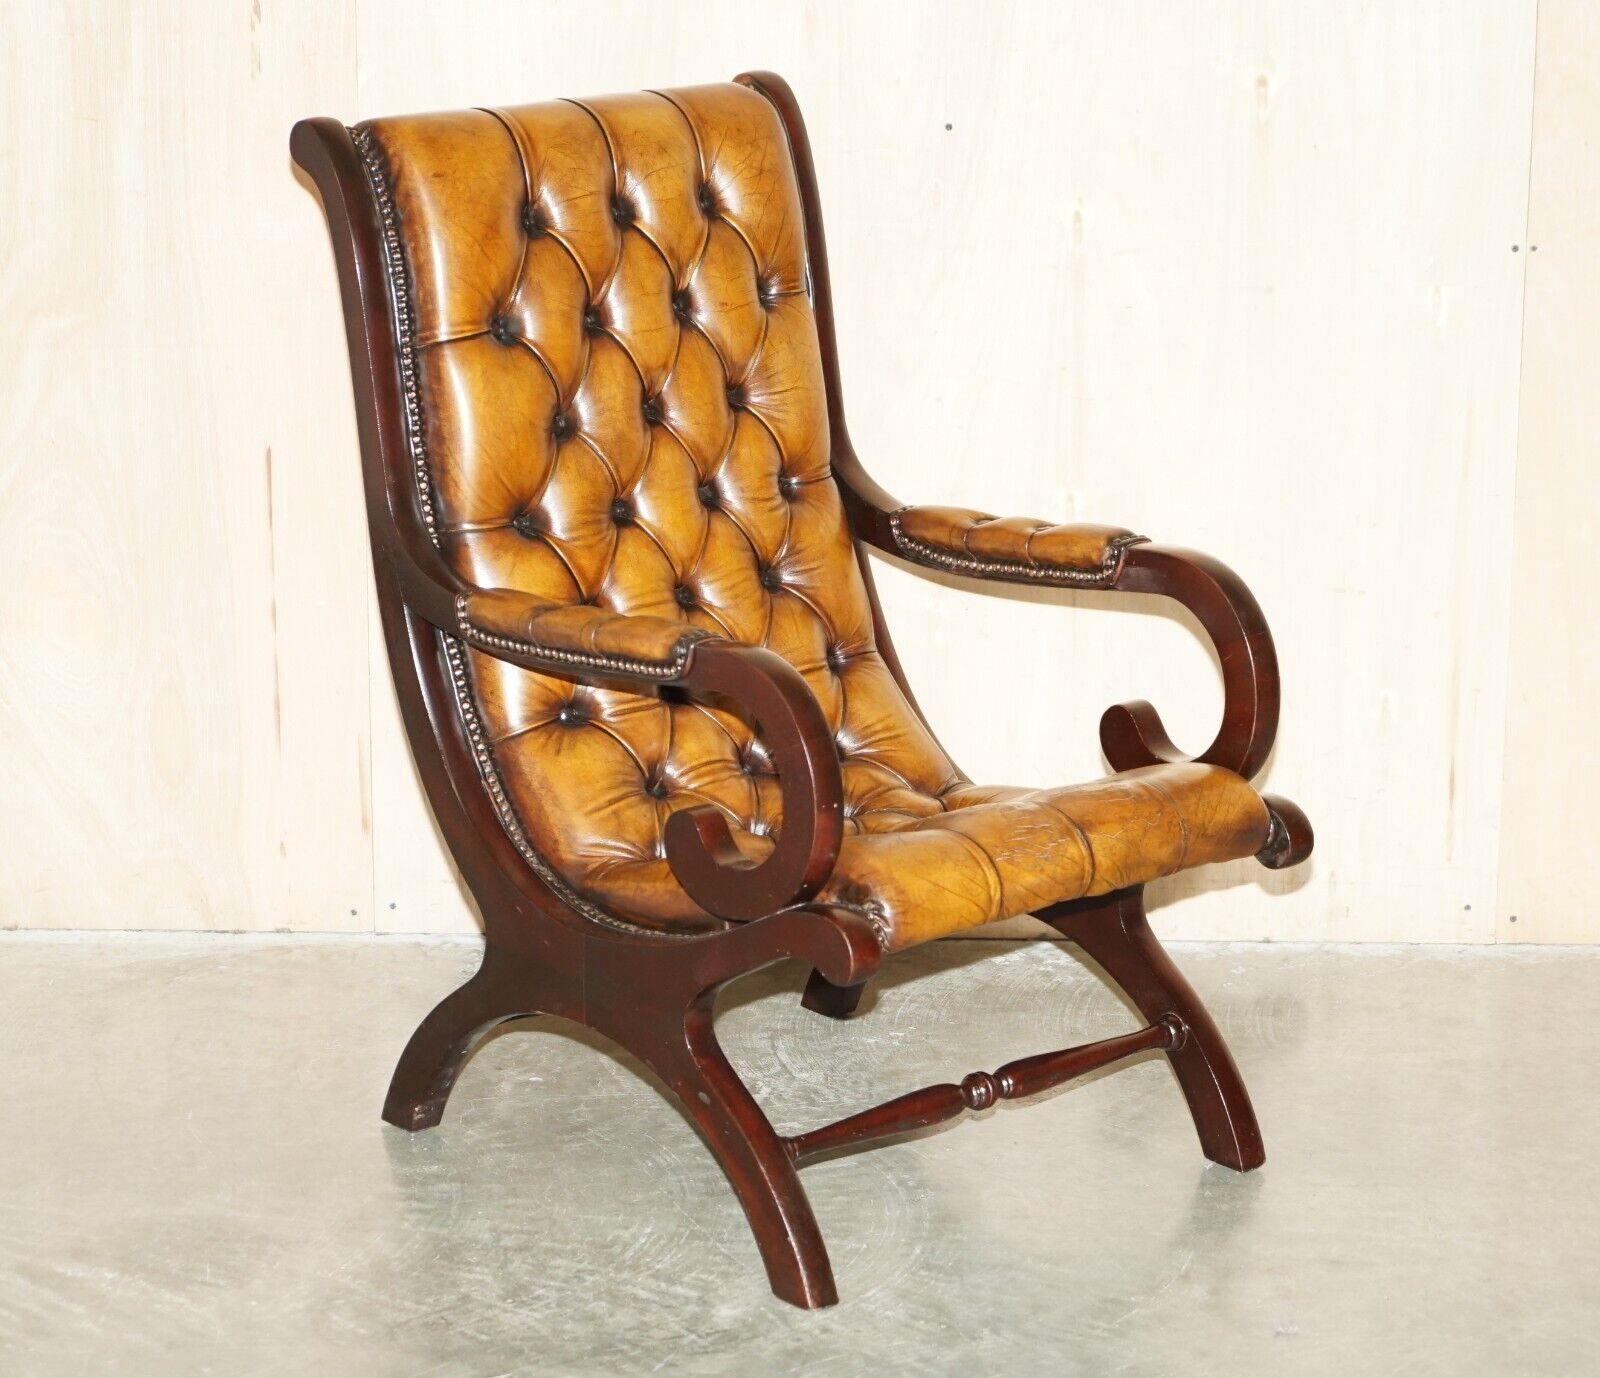 FINE VINTAGE CIRCA 1950'S CHESTERFIELD HAND DYED BROWN LEATHER LIBRARY ARMCHAIR